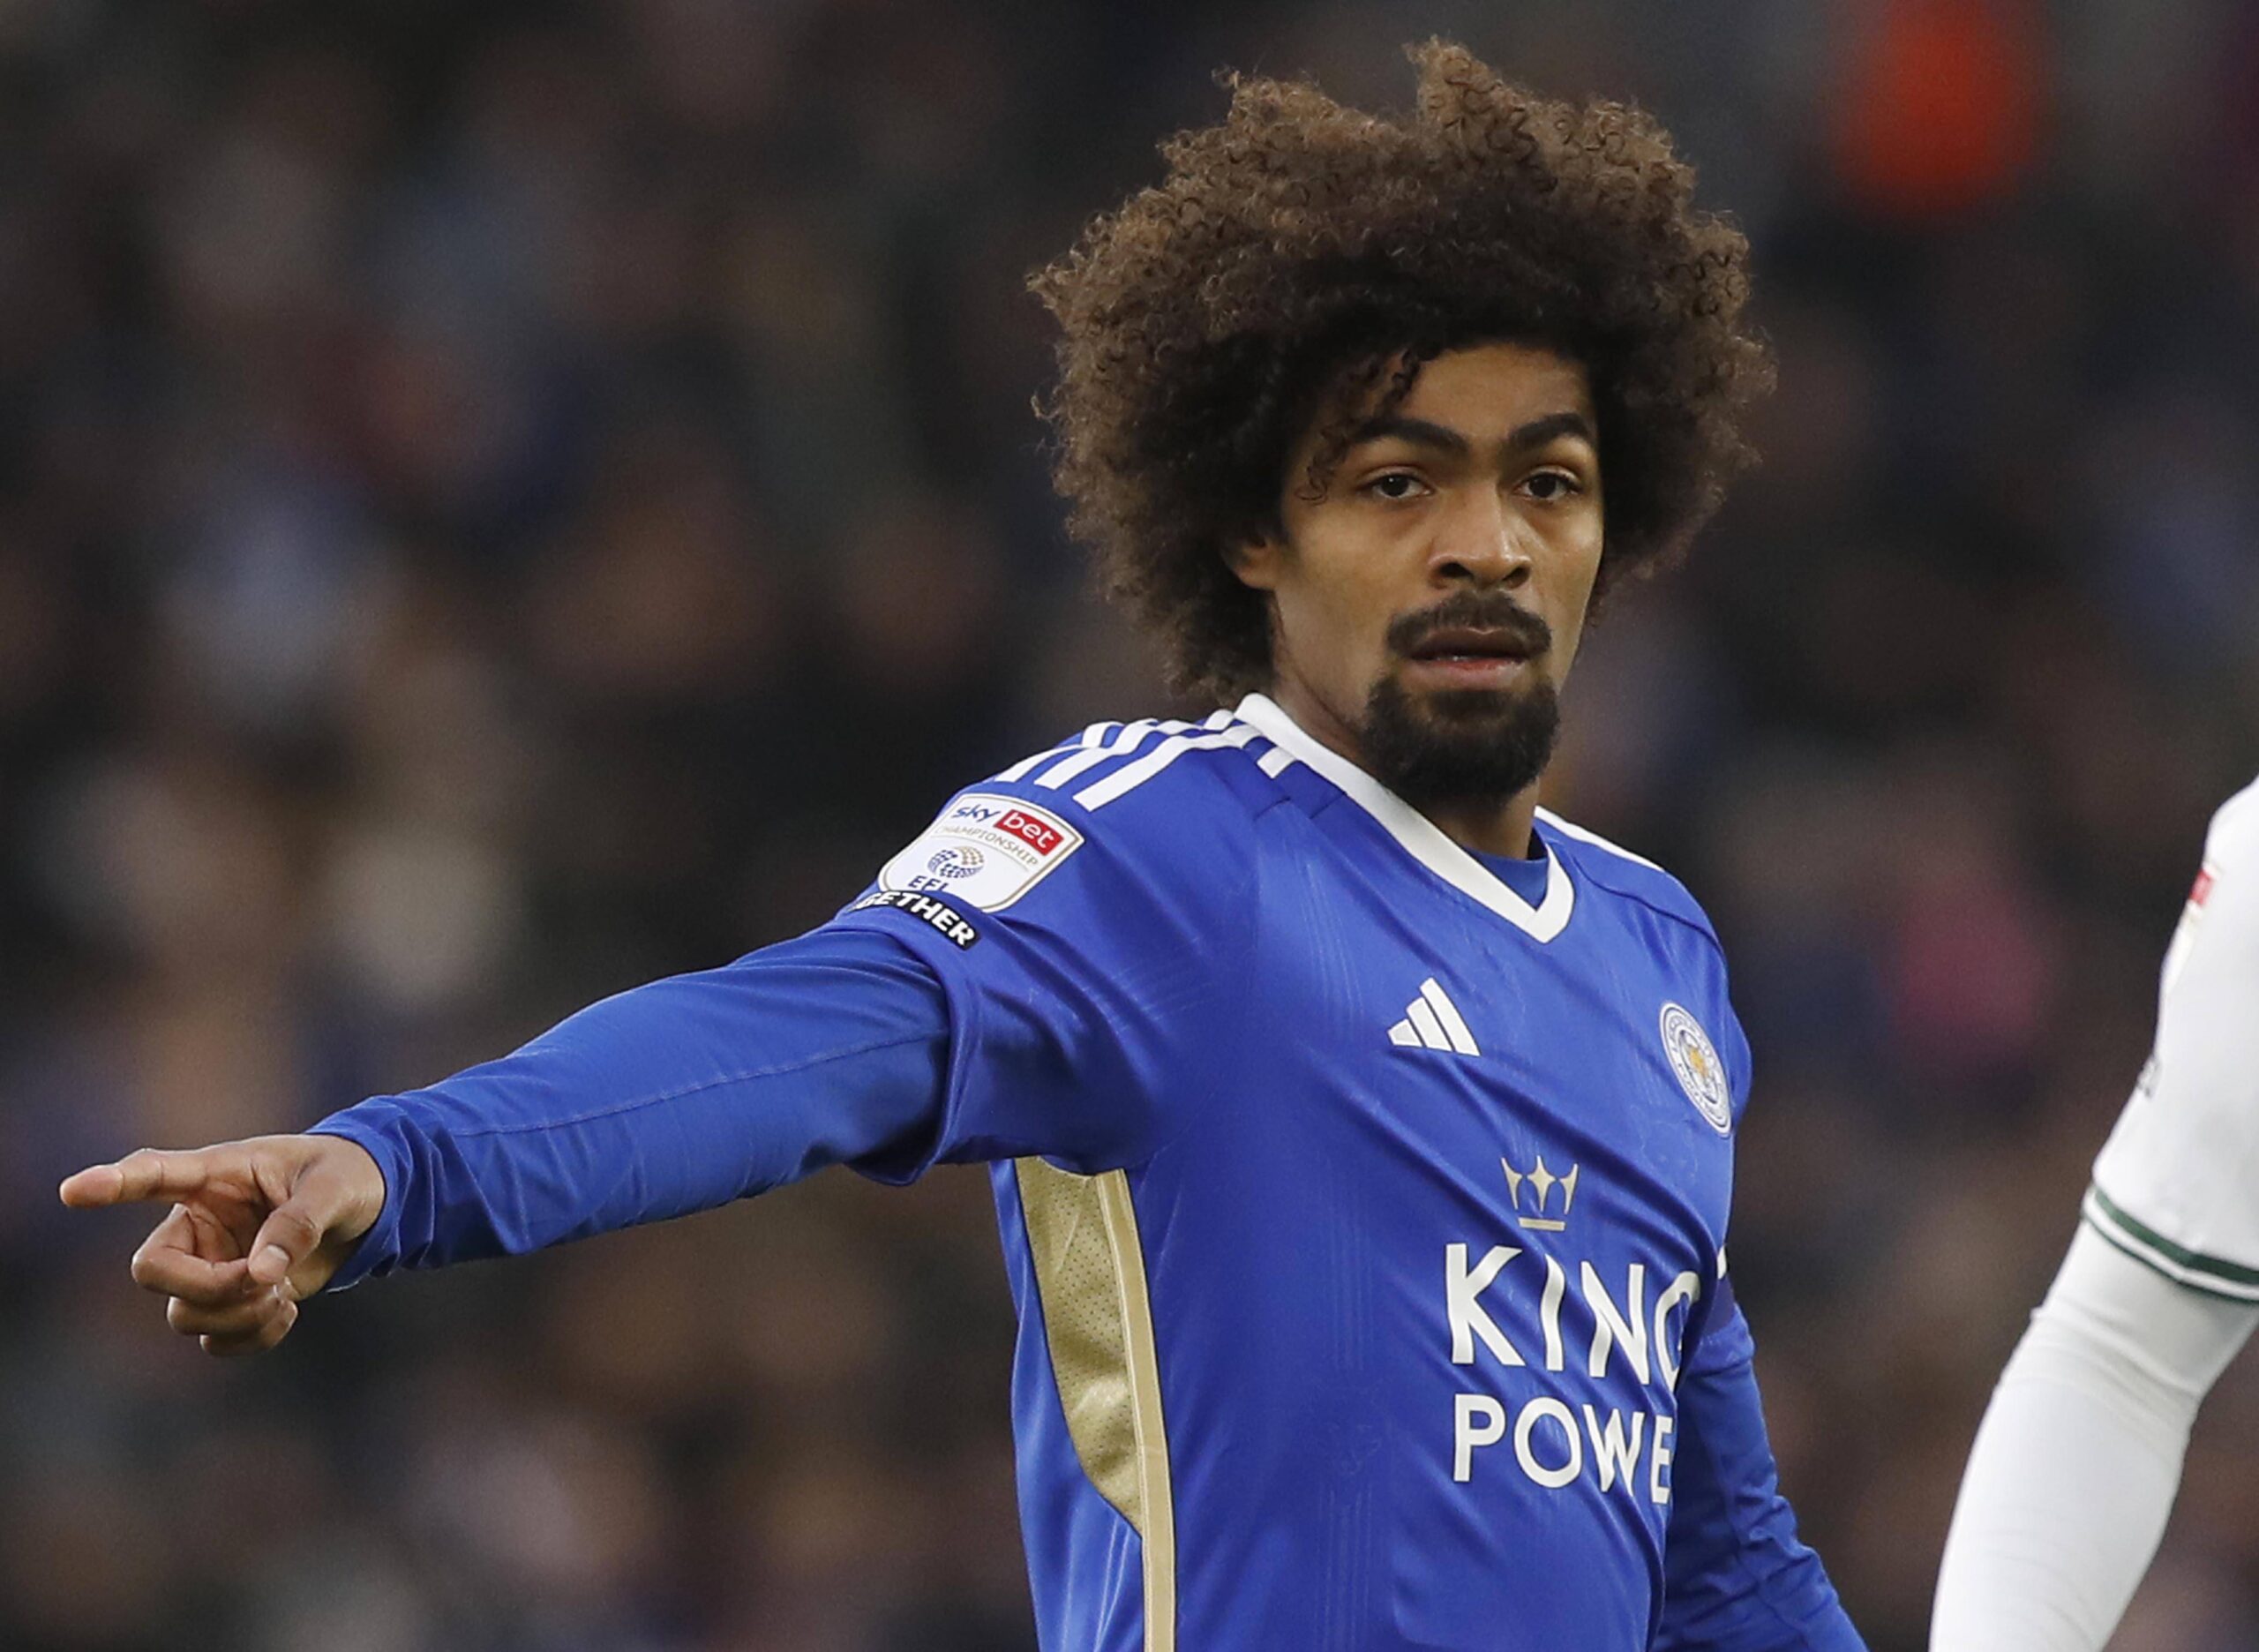 Leicester's Hamza Choudhury directing his teammates during a match